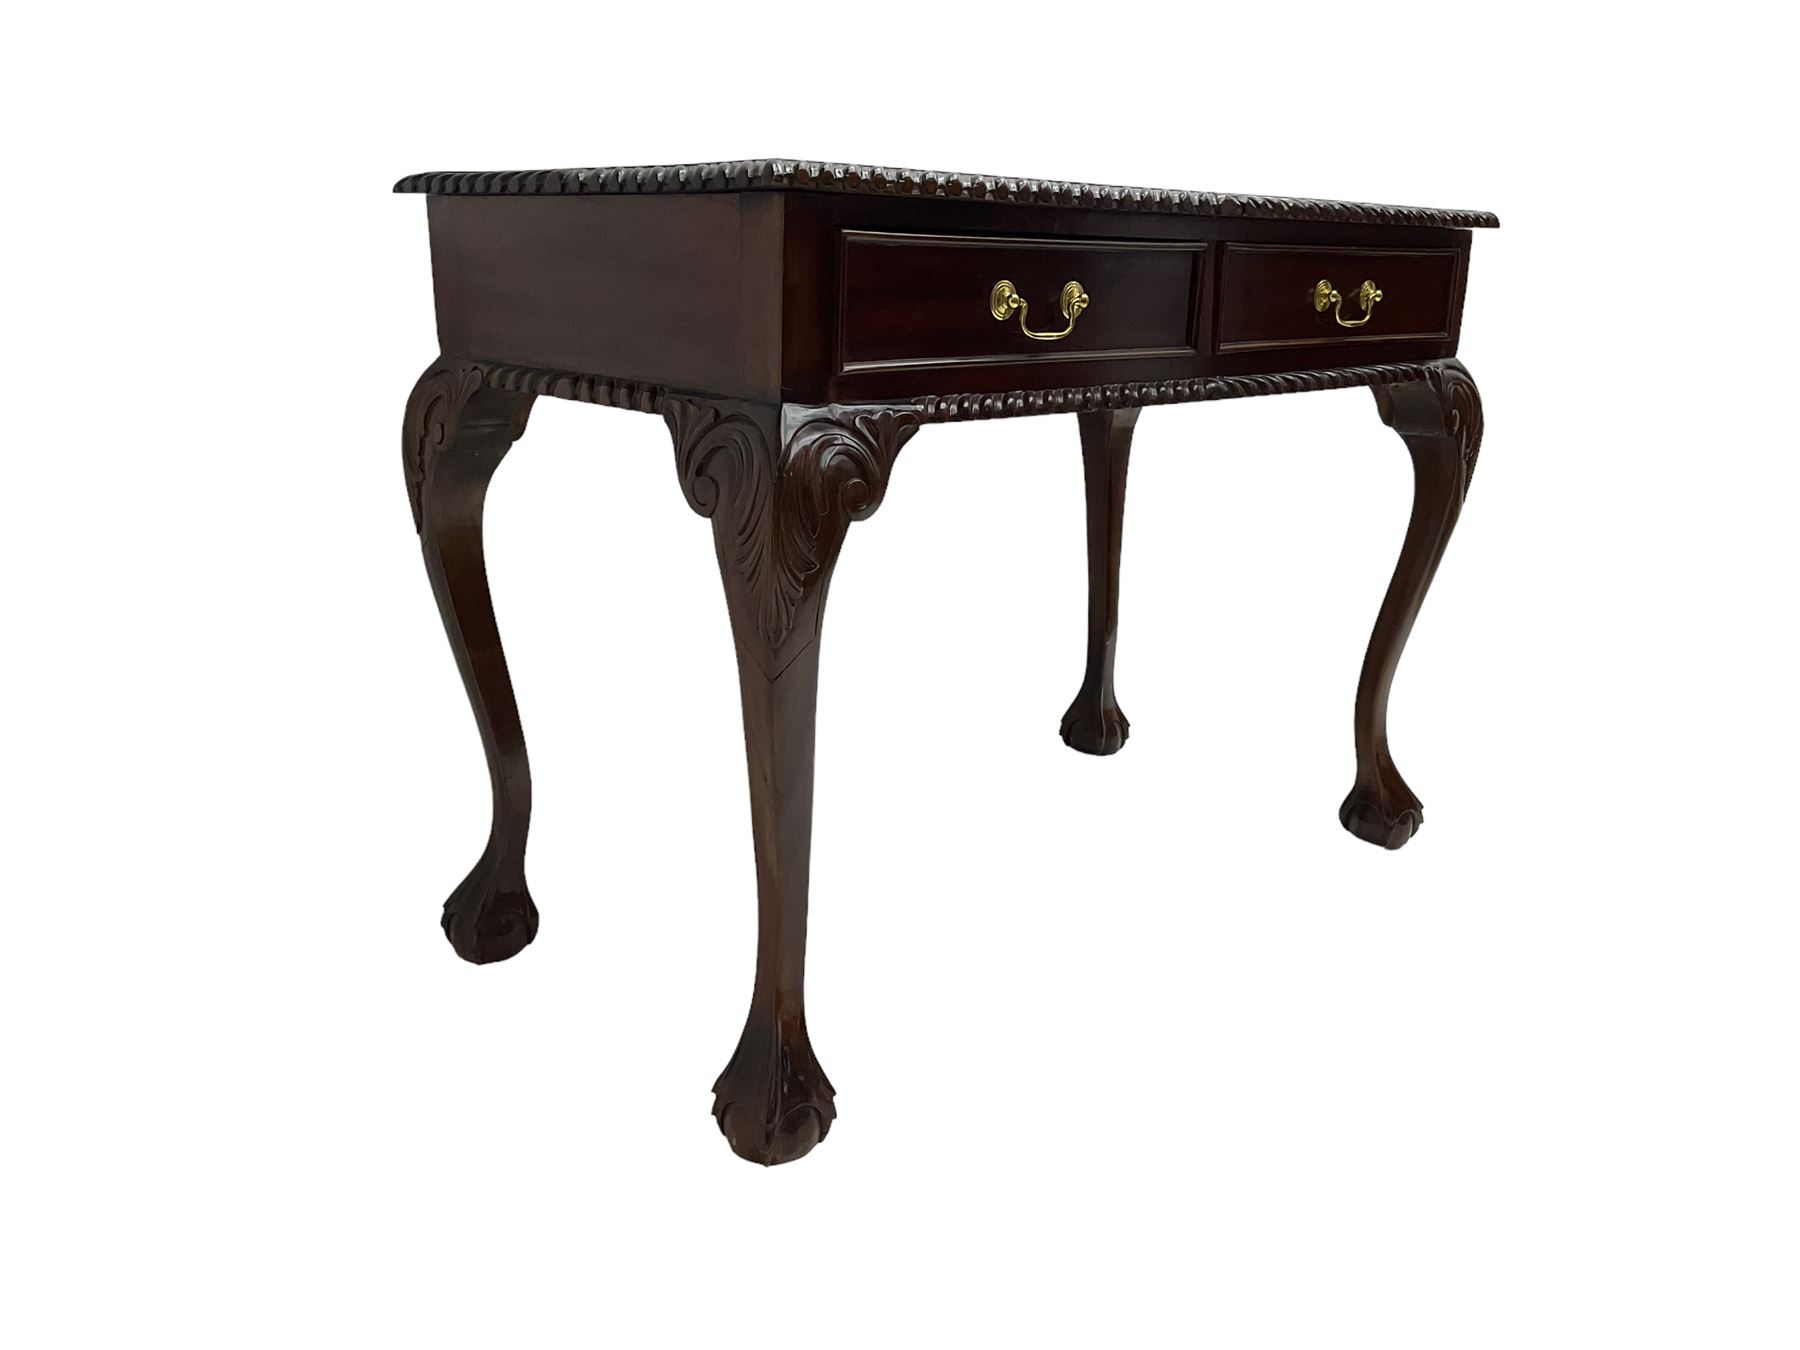 Georgian Chippendale design mahogany side table - Image 8 of 8